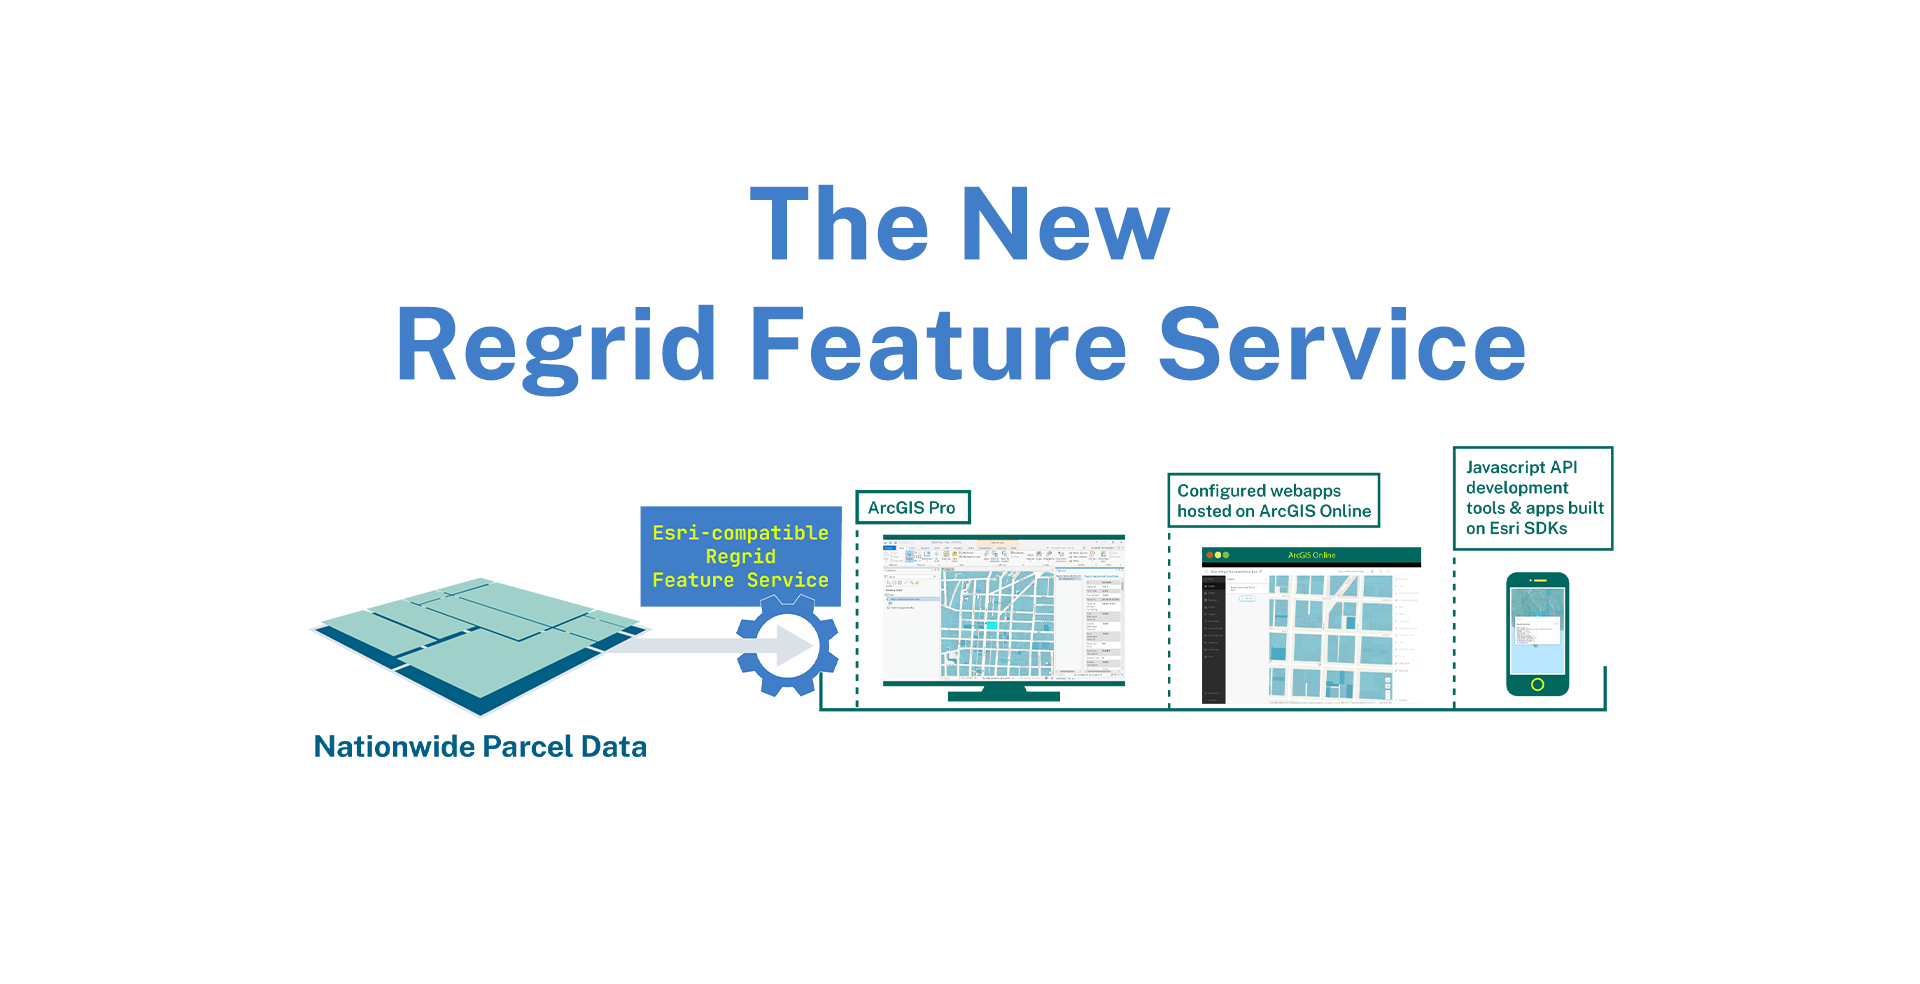 The New Regrid Feature Service